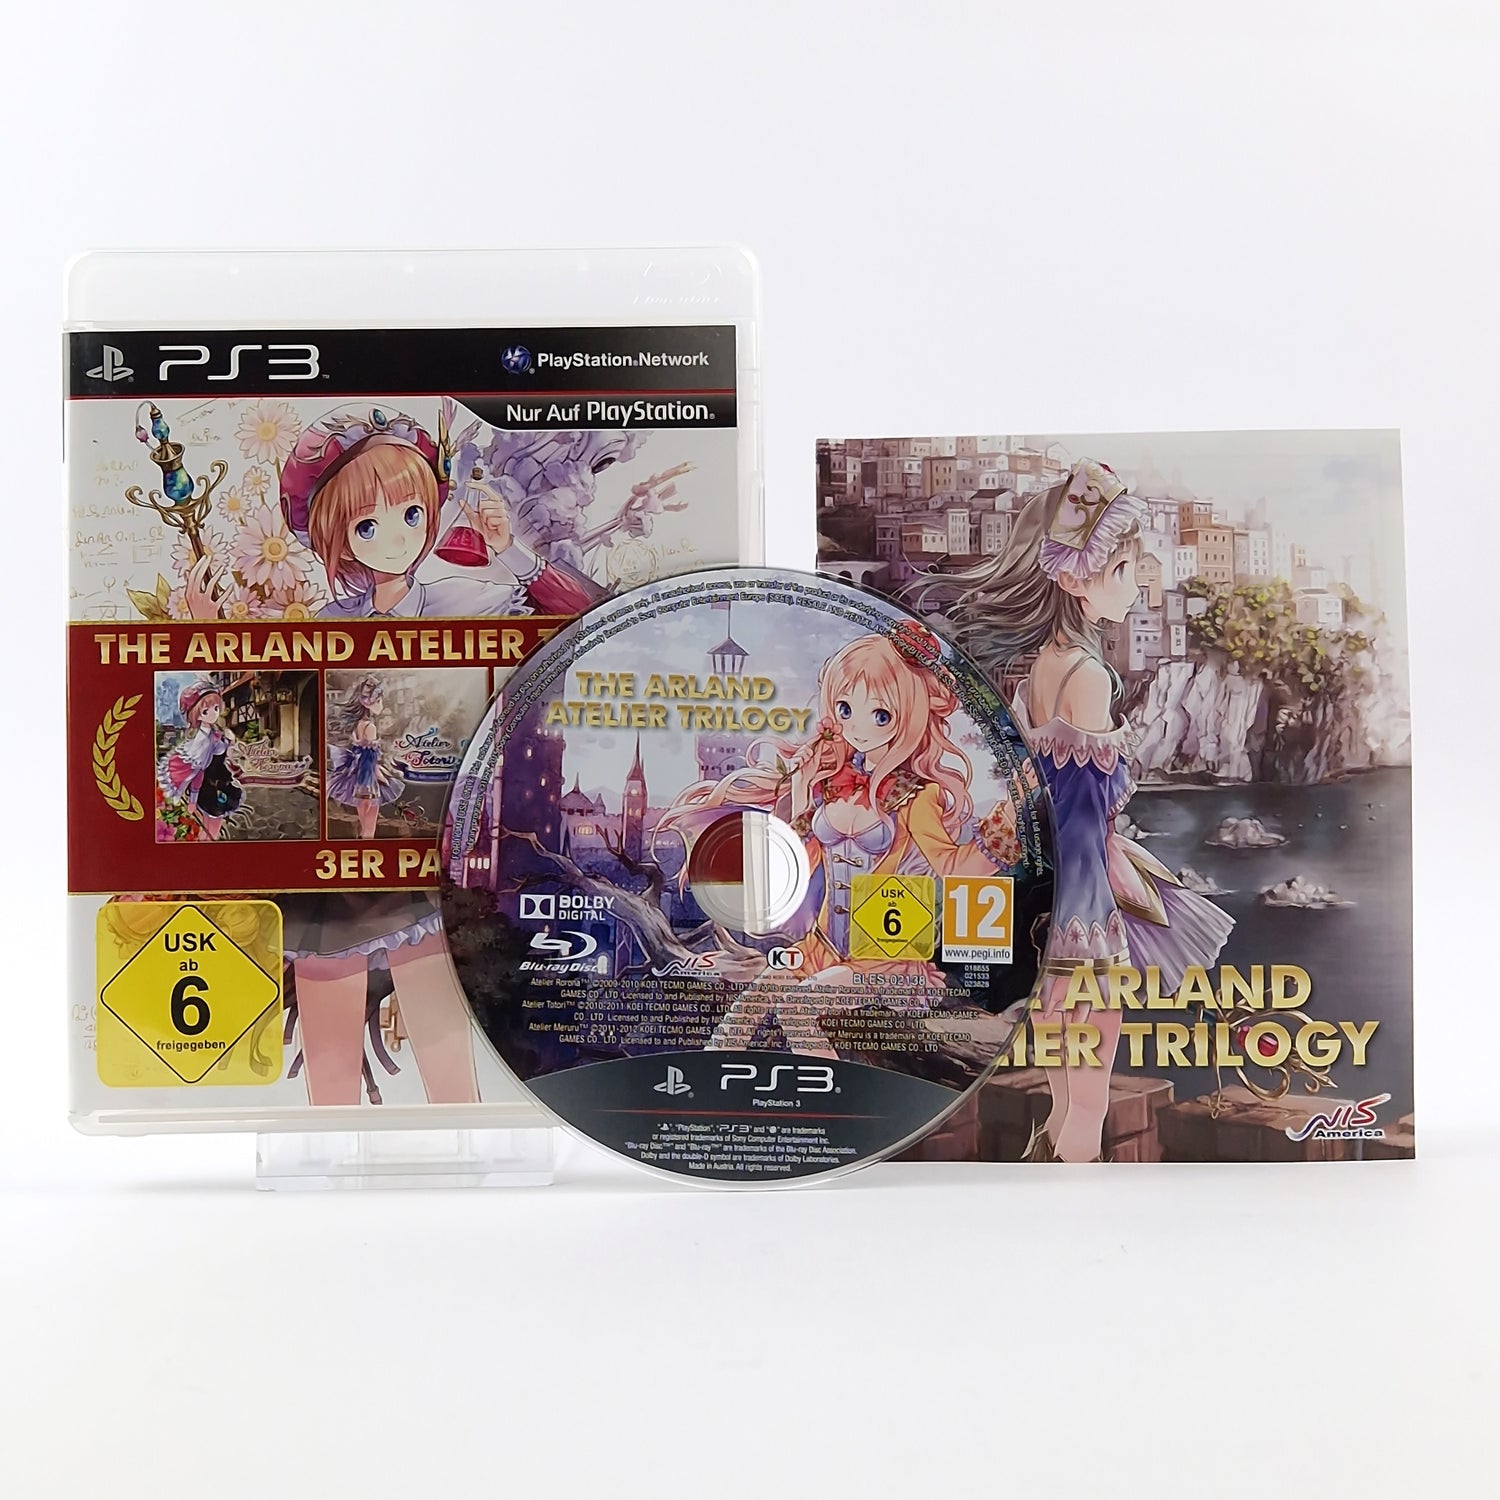 Sony Playstation 3 Spiel : The Arland Atelier Trilogy - OVP Anleitung PAL PS3